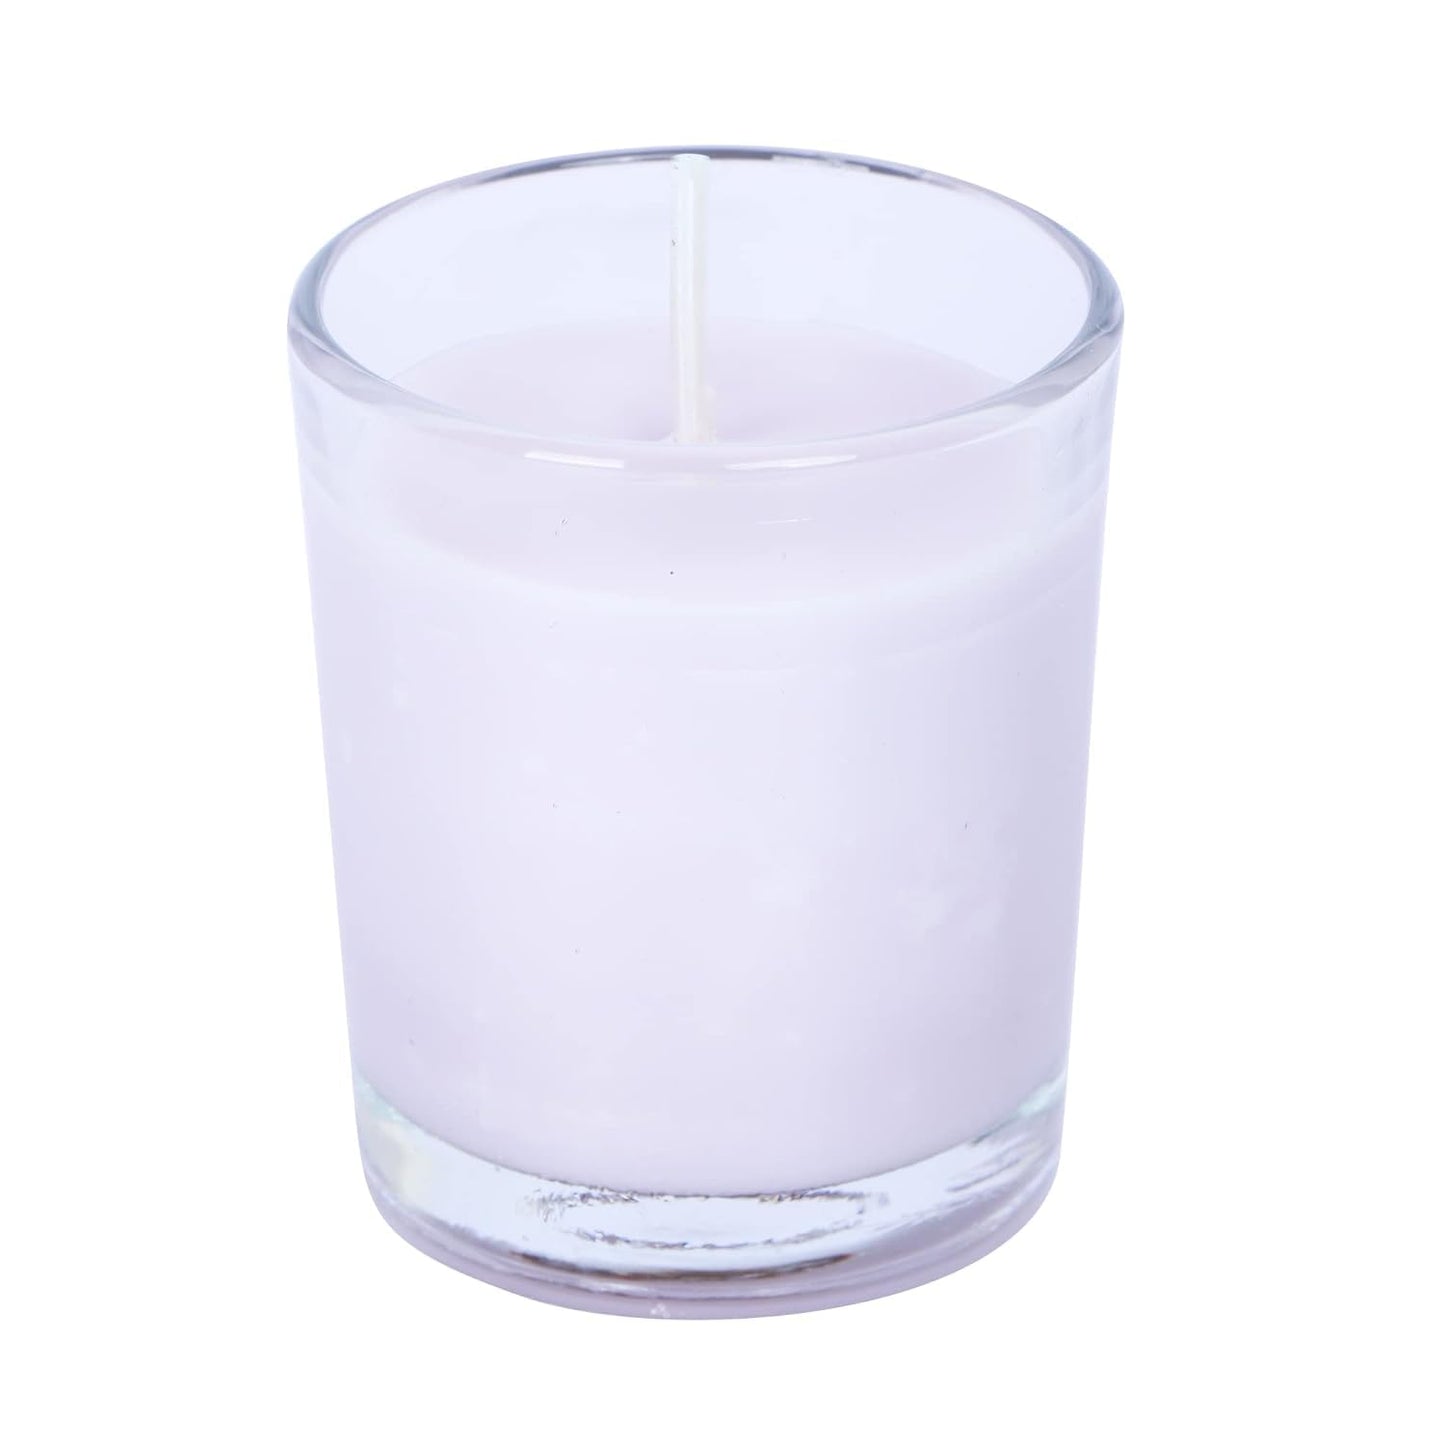 Pujahome cented Votive Glass Candles Set of 3, 100% Natural Soy Wax (Berry Blast)